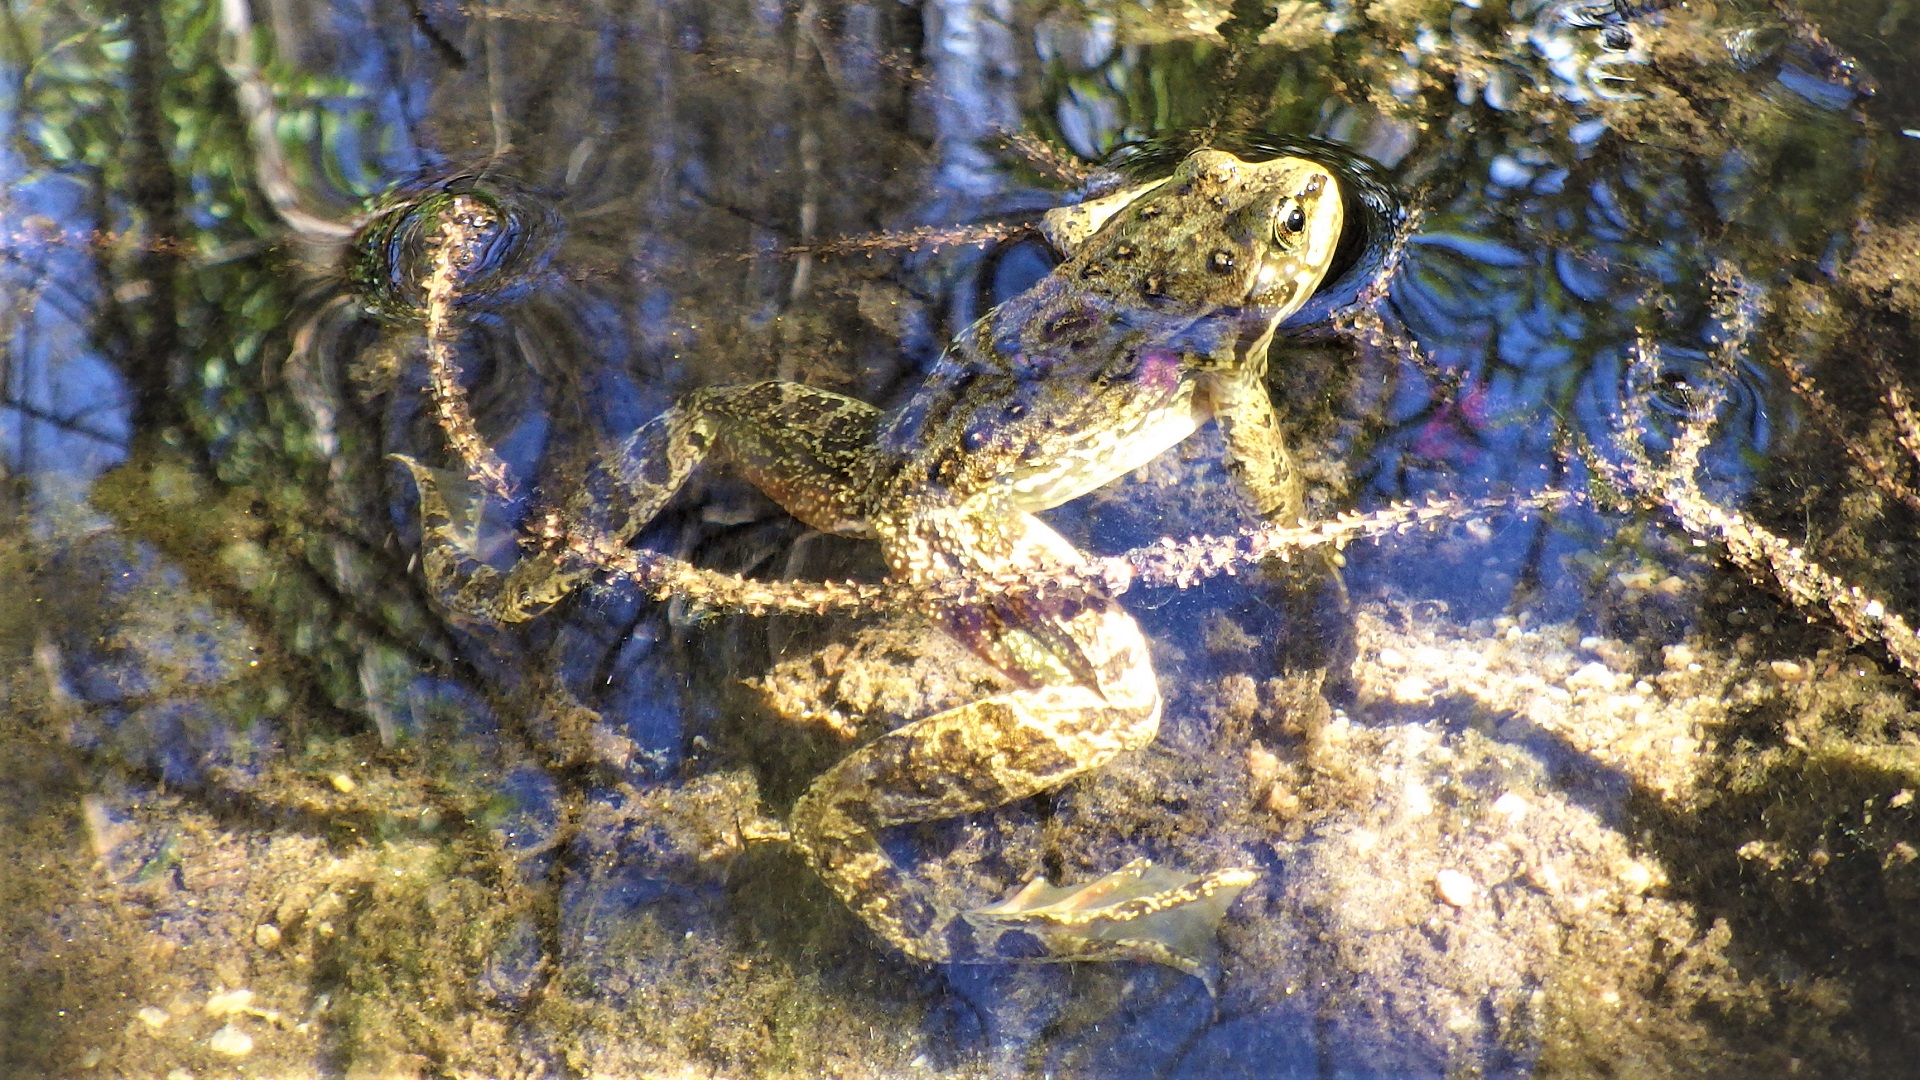 A frog submerged in a shallow creek